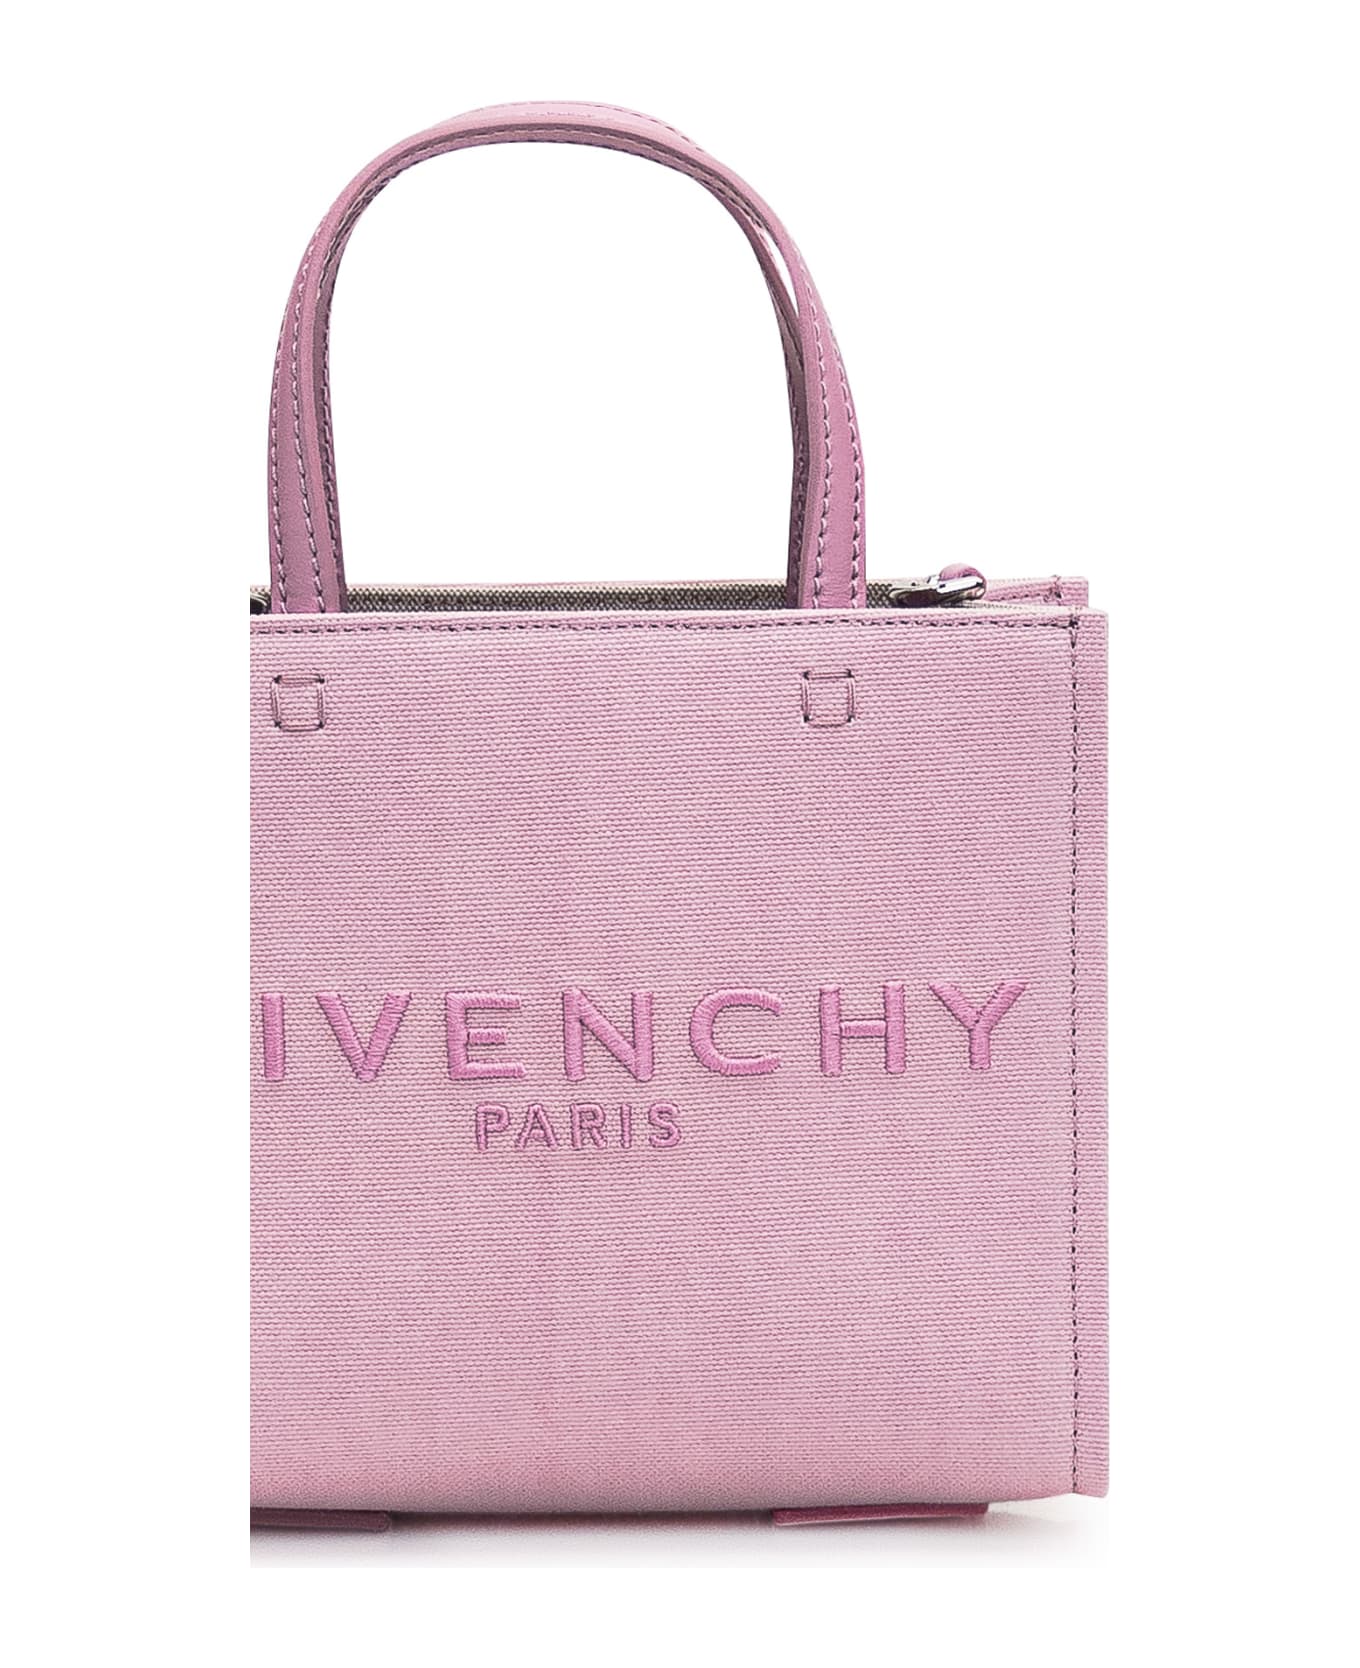 Givenchy G-tote Mini Bag - Old Pink トートバッグ